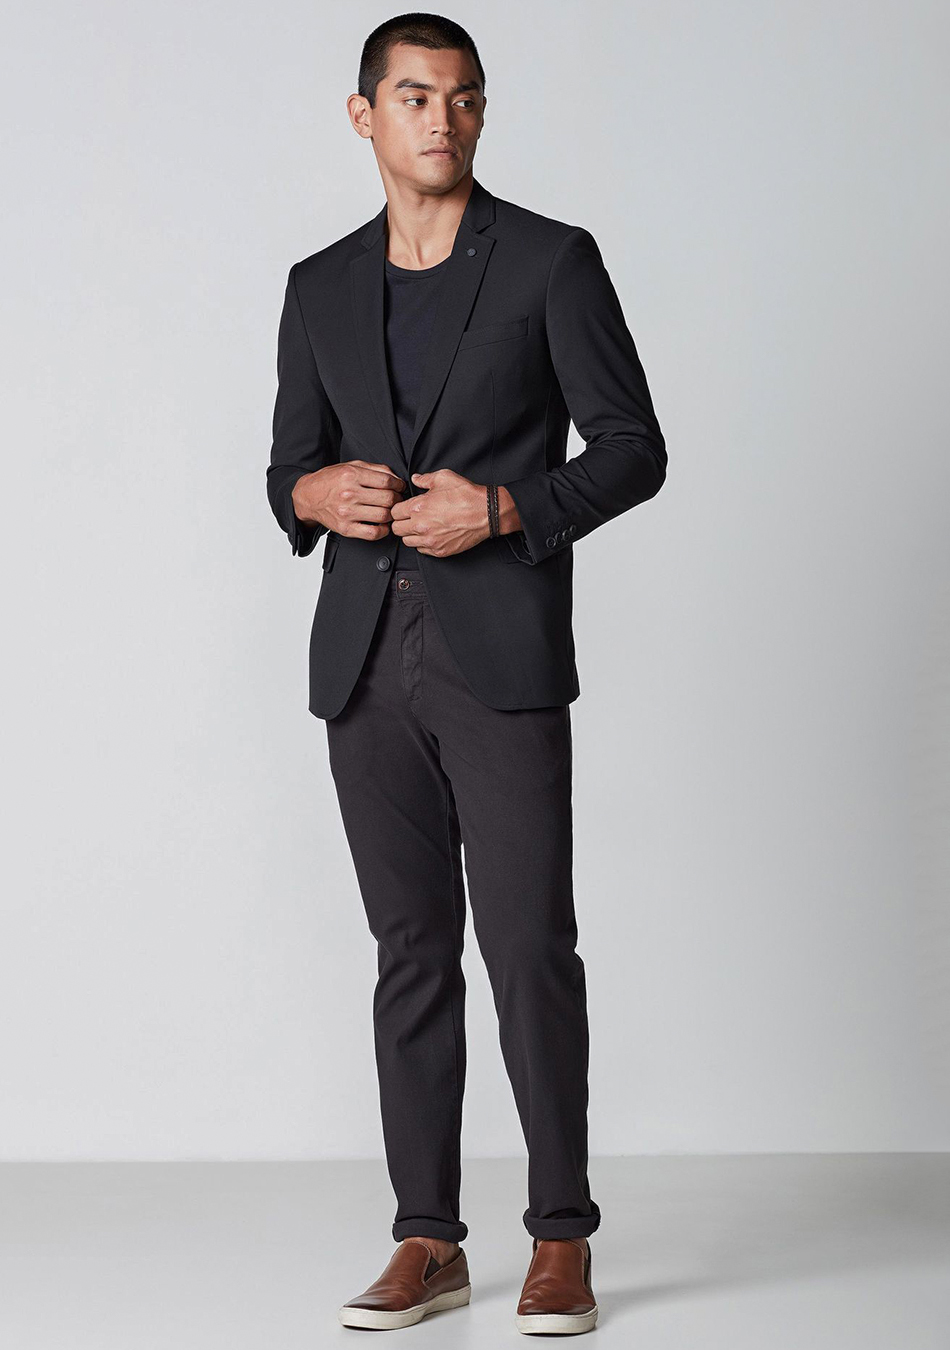 Black suit jacket, black t-shirt, black chinos, and brown sneakers